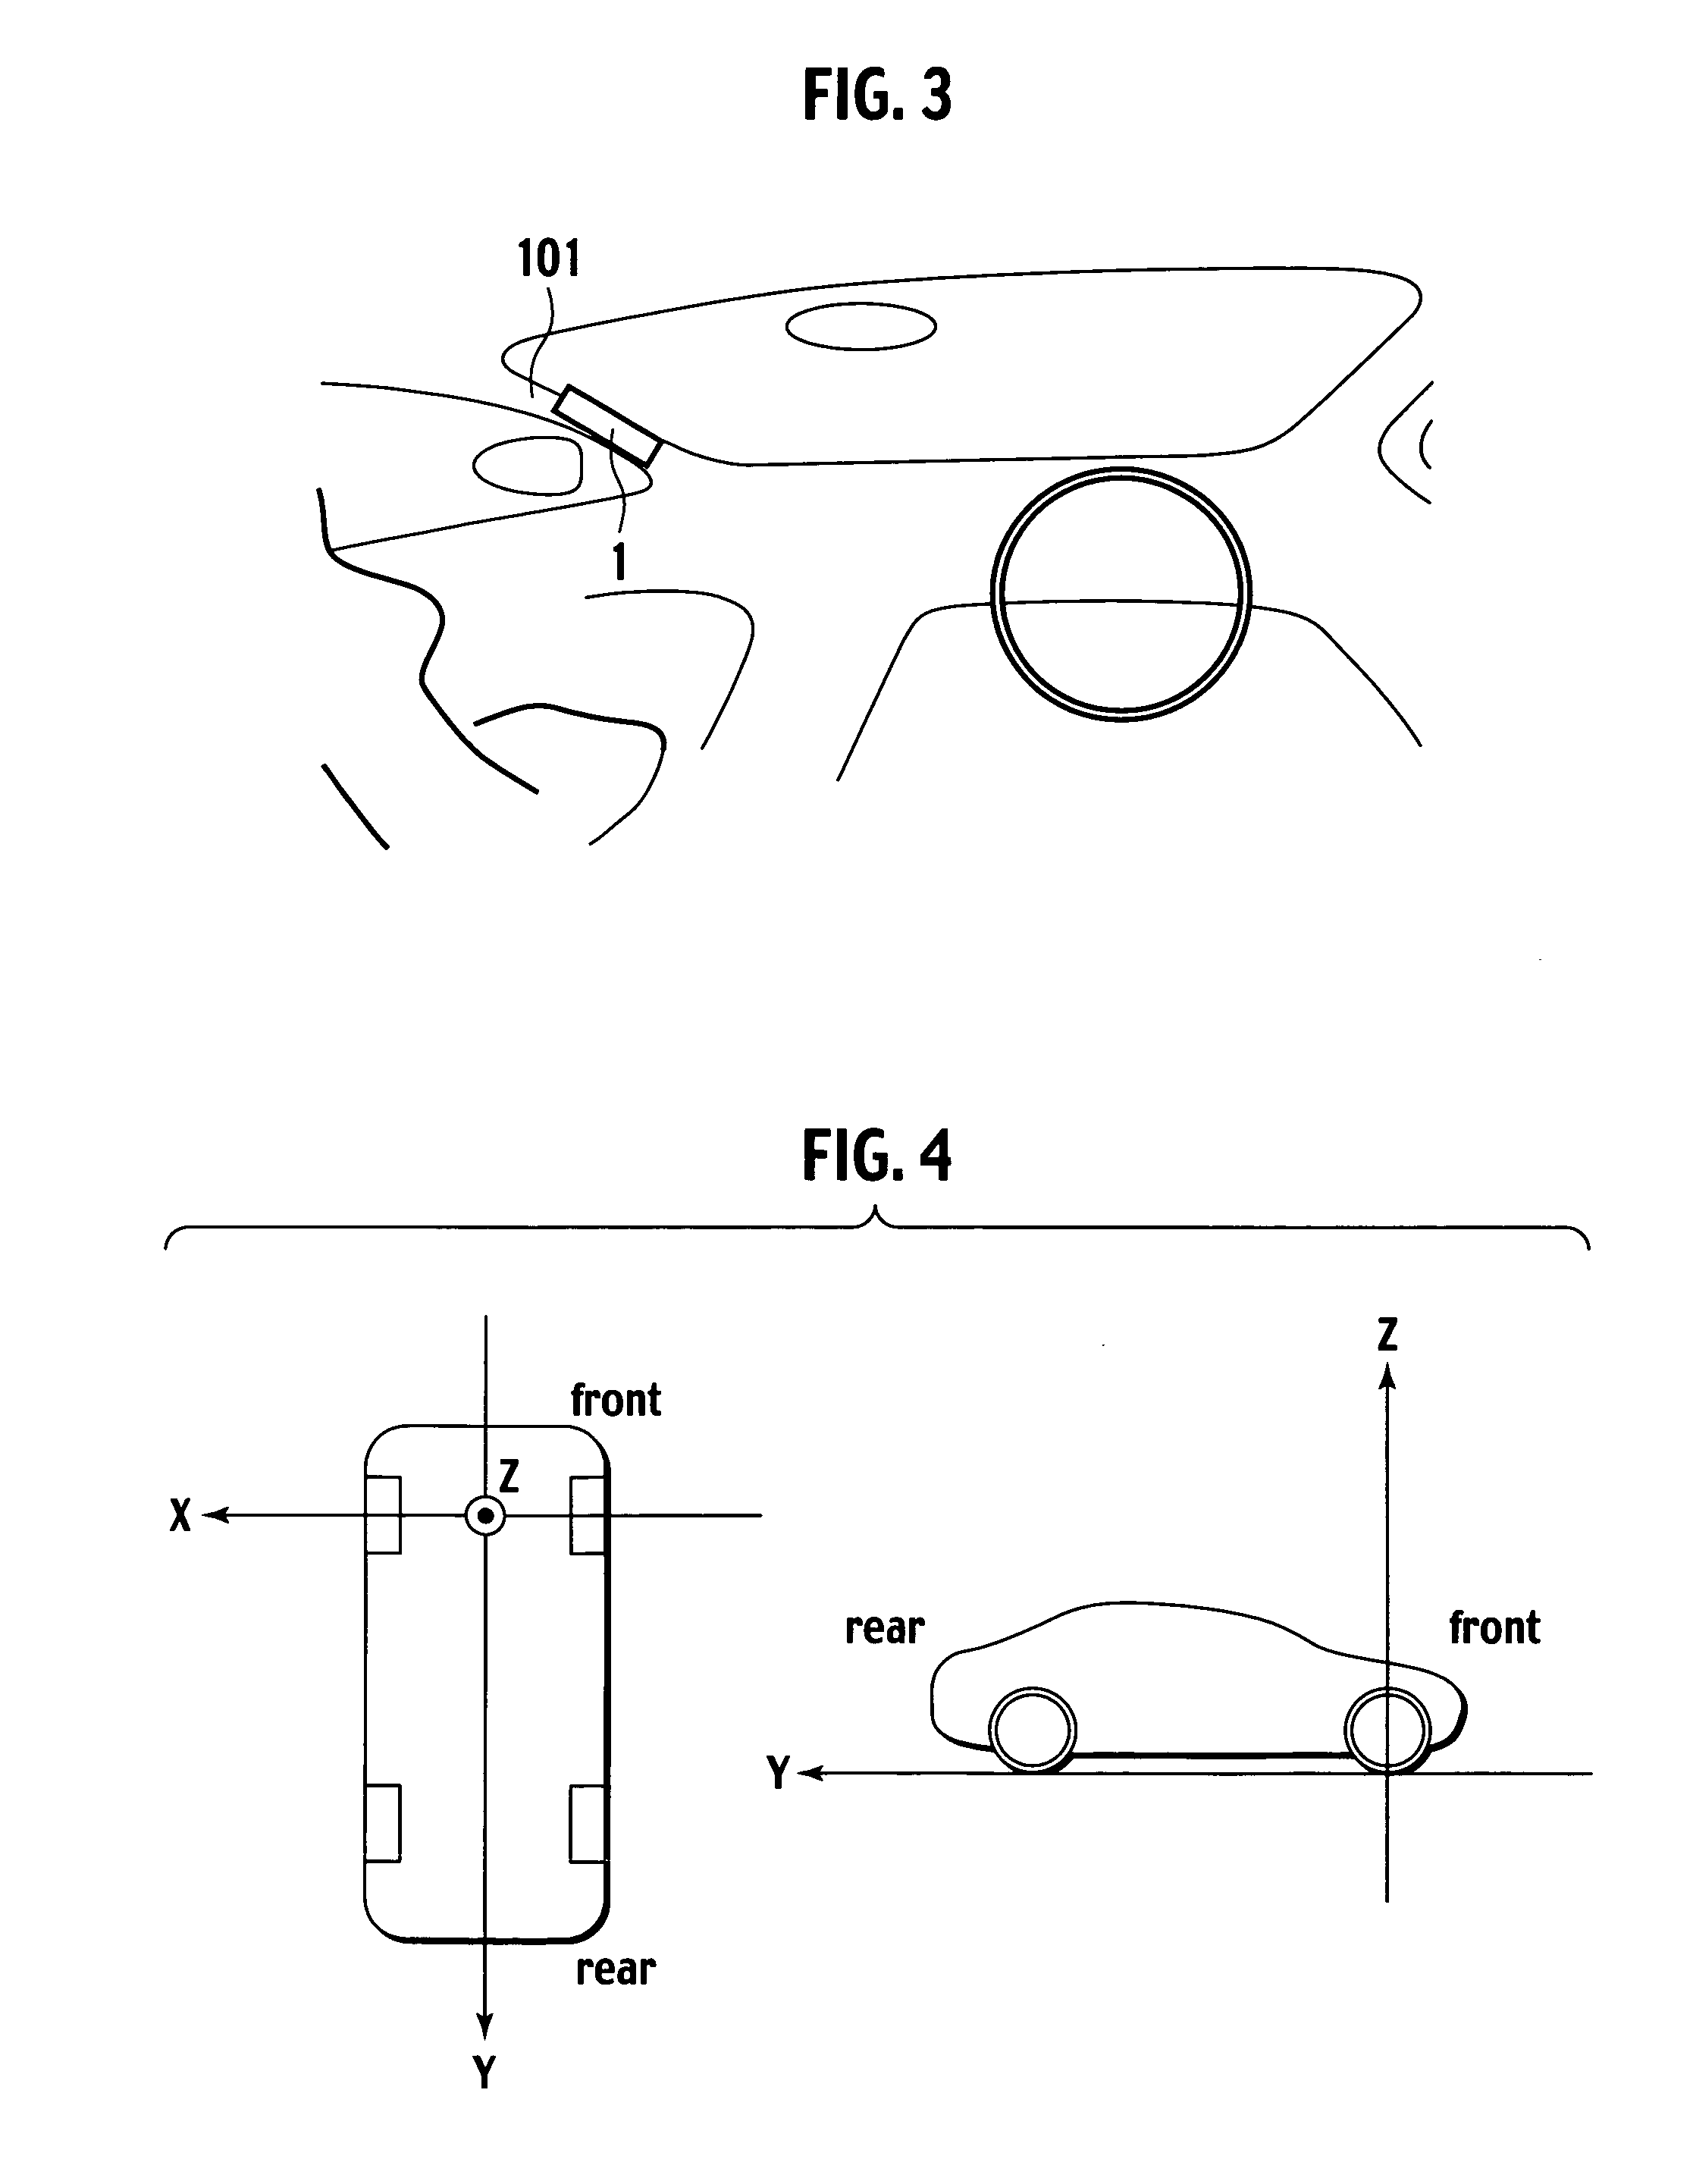 Blind spot image display apparatus and method thereof for vehicle